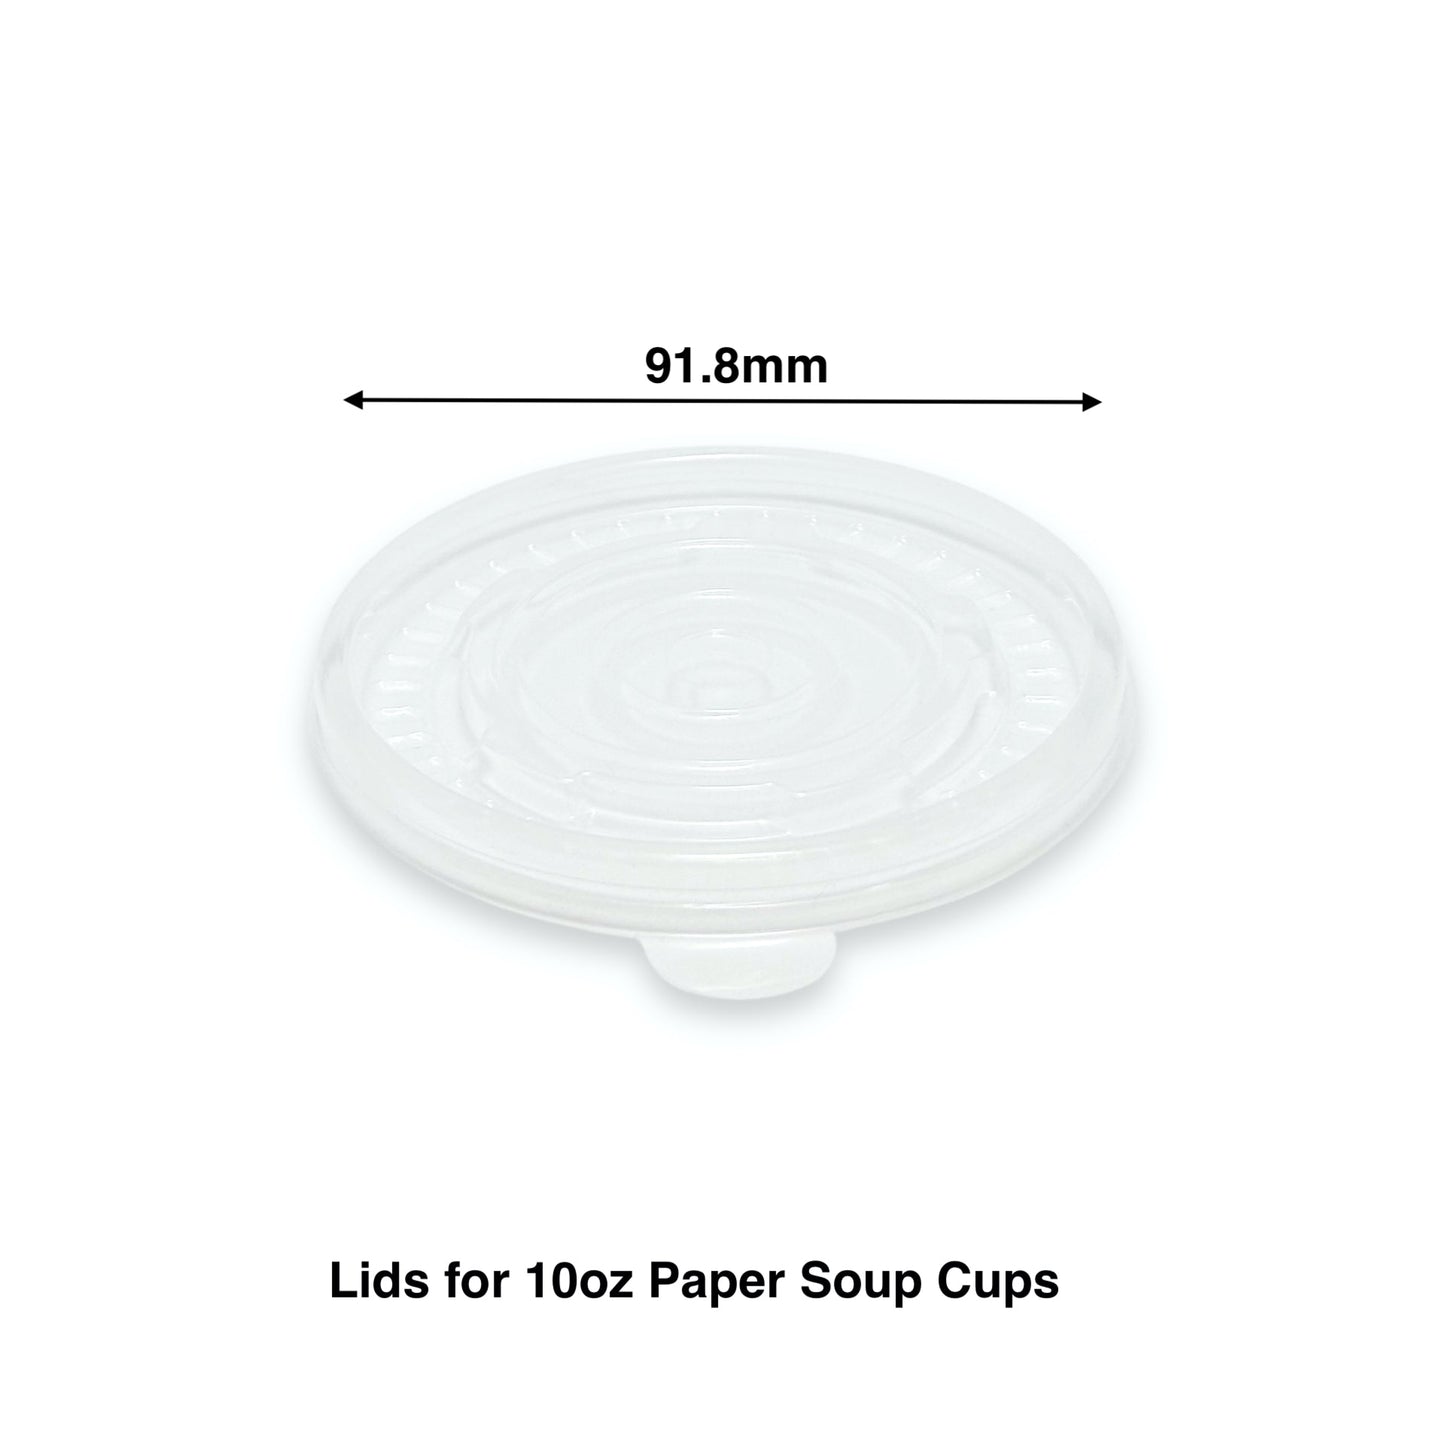 KIS-SL918G | 91.8mm PP Lid for 10oz Paper Soup Container; From $0.053/pc